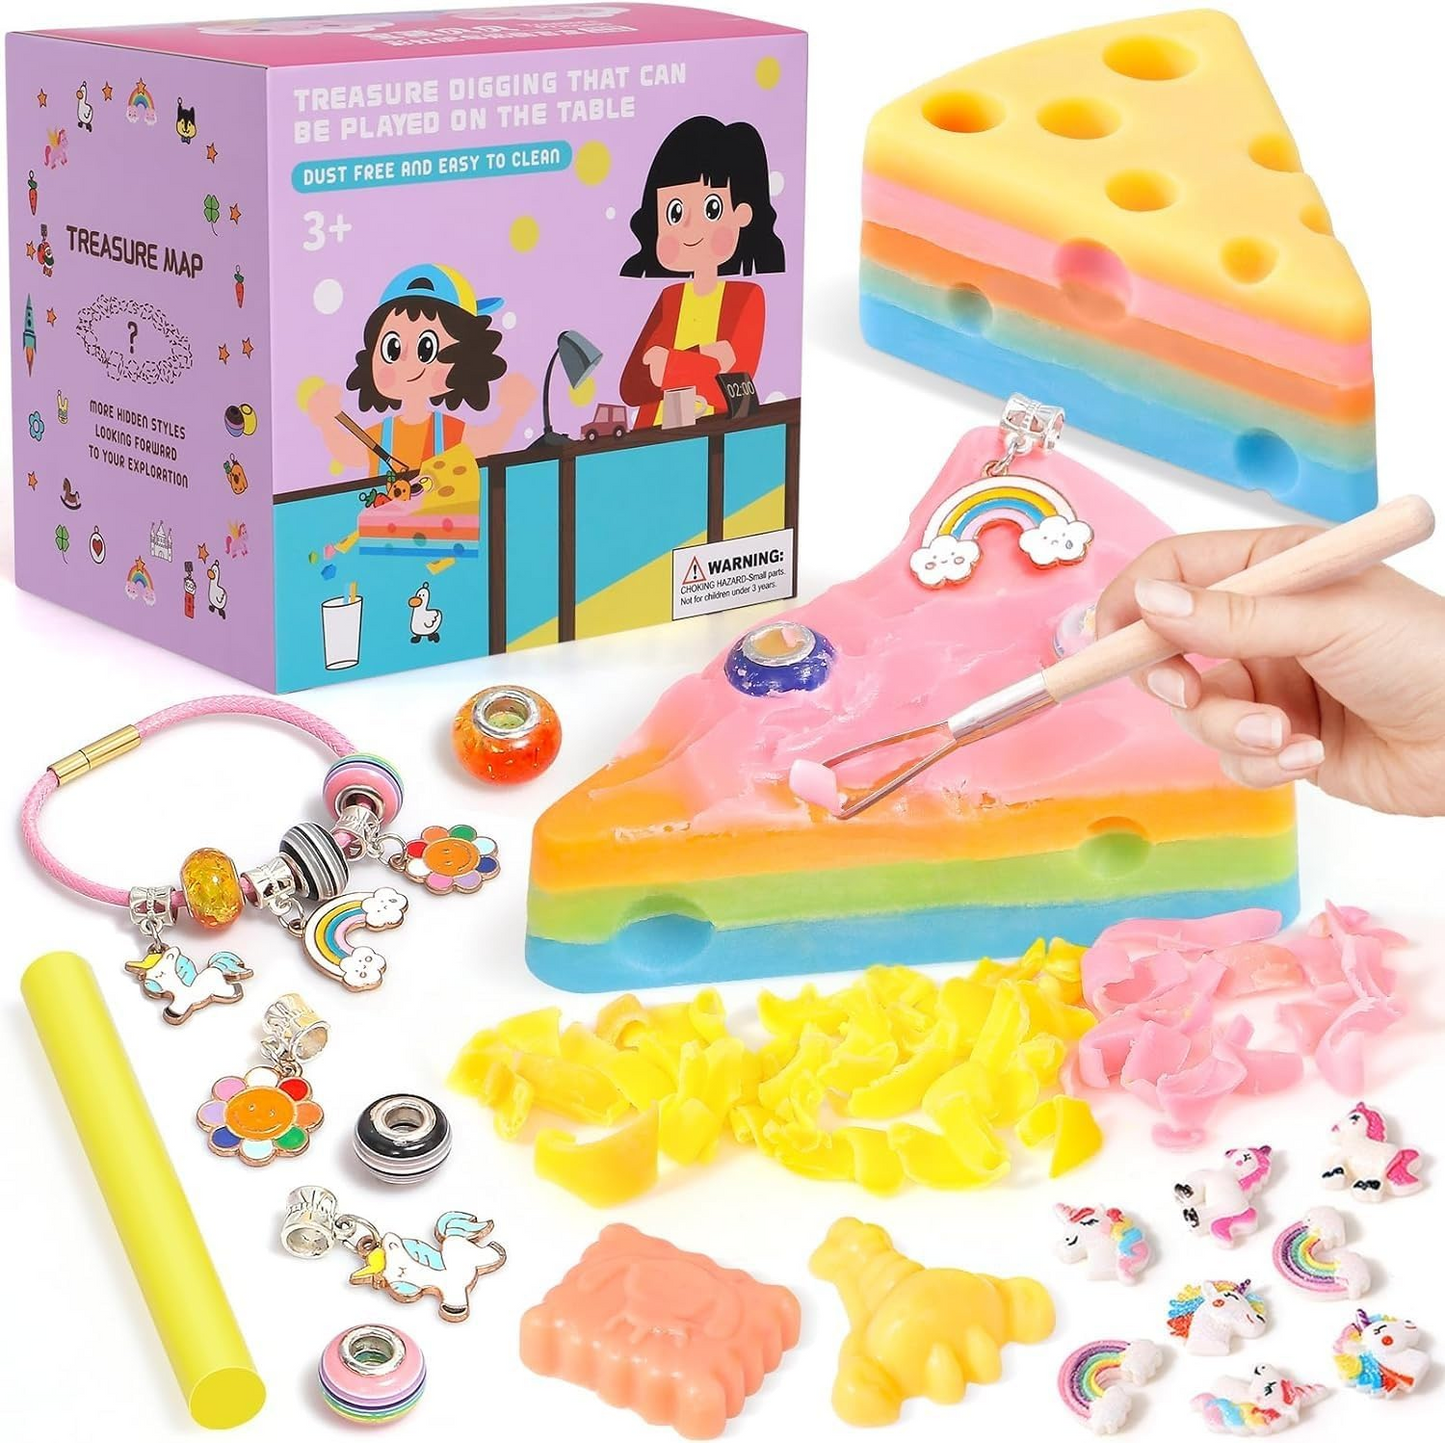 TuKIIE 4-in-1 Excavation Dig Kit for Kids, Rainbow Cheese Bar Soap with 6 Random Charms, Soap & Charm Bracelet Making Kit Educational Toys for Girls Children